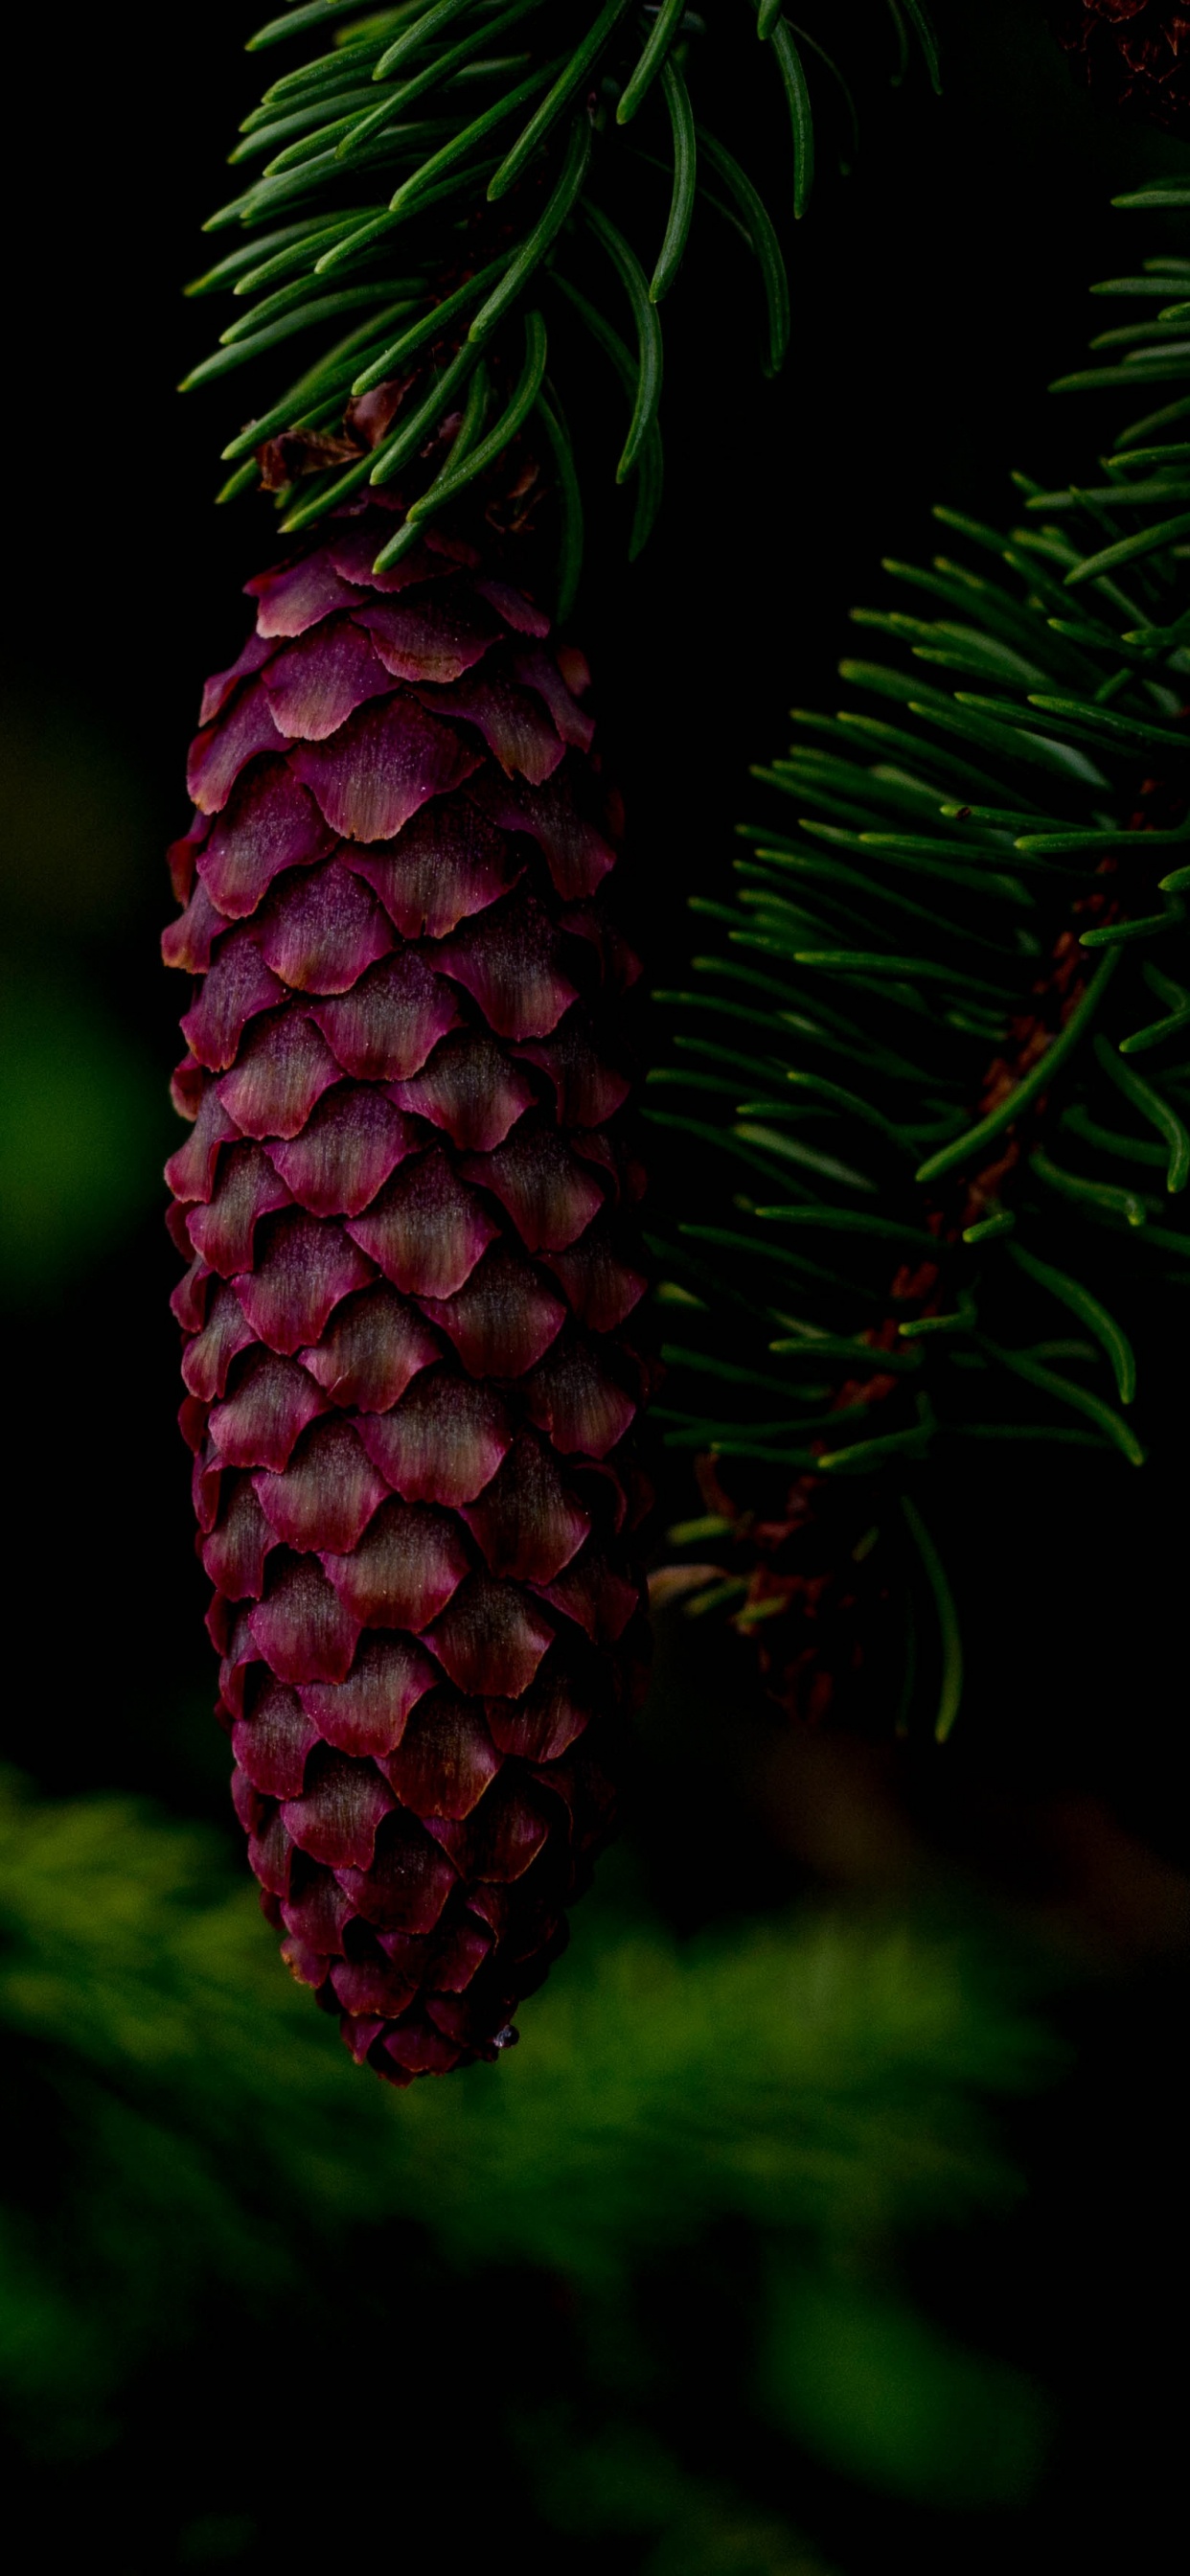 Red Pine Cone on Green Pine Tree. Wallpaper in 1242x2688 Resolution